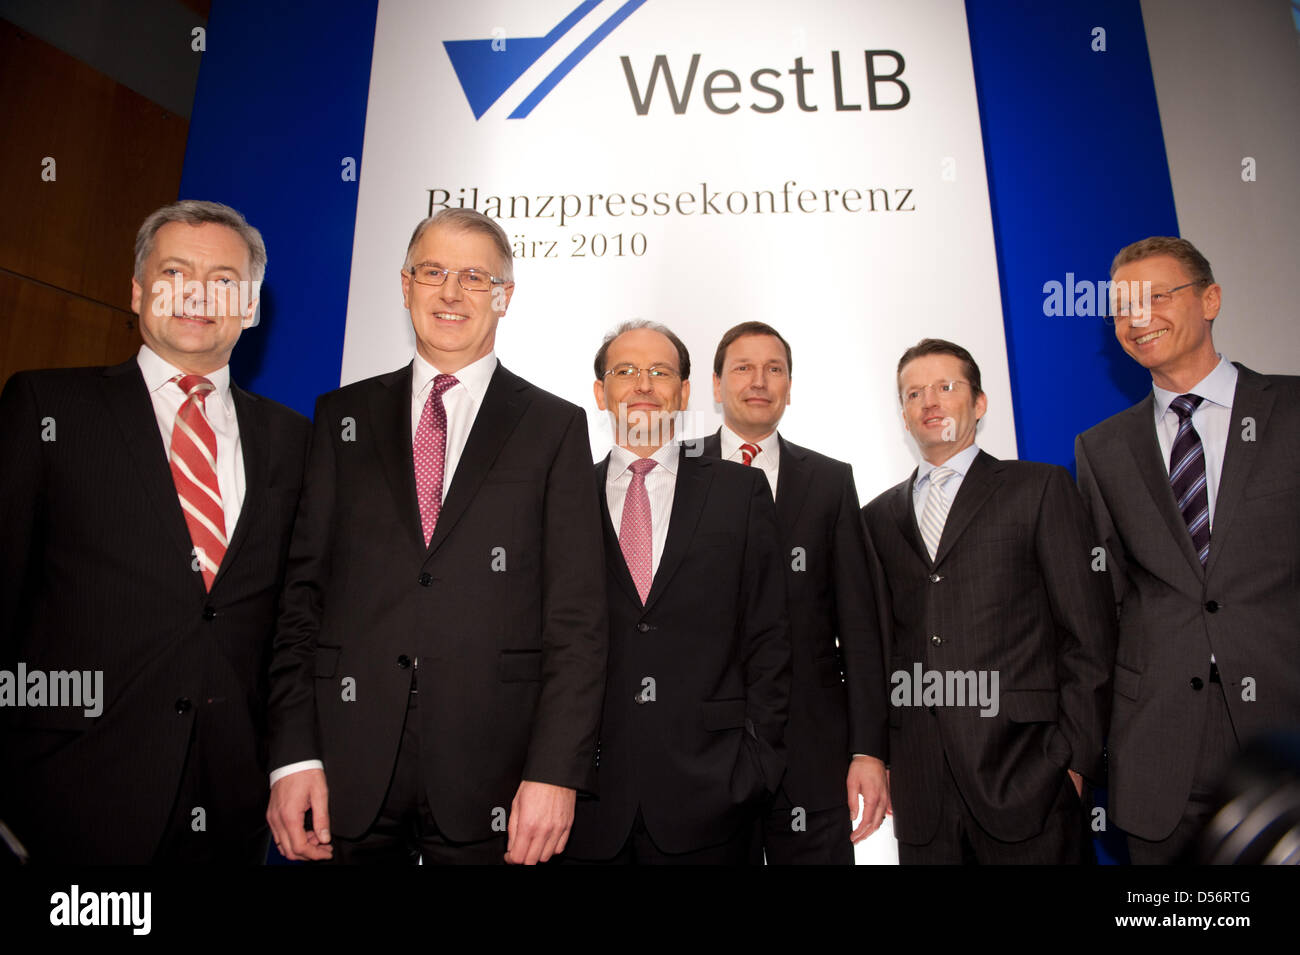 Members of the board Hubert Beckmann (L-R), CEO Dietrich Voigtlaender, Thomas Gross, Werner Taiber, Klemens Breuer and Hans-Juergen Niehaus of WestLB pictured at a balance press conference in Duesseldorf, Germany, 23 March 2010. Germany's third largest regional state bank made a huge loss in 2009 and is about to be split. Photo: BERND THISSEN Stock Photo